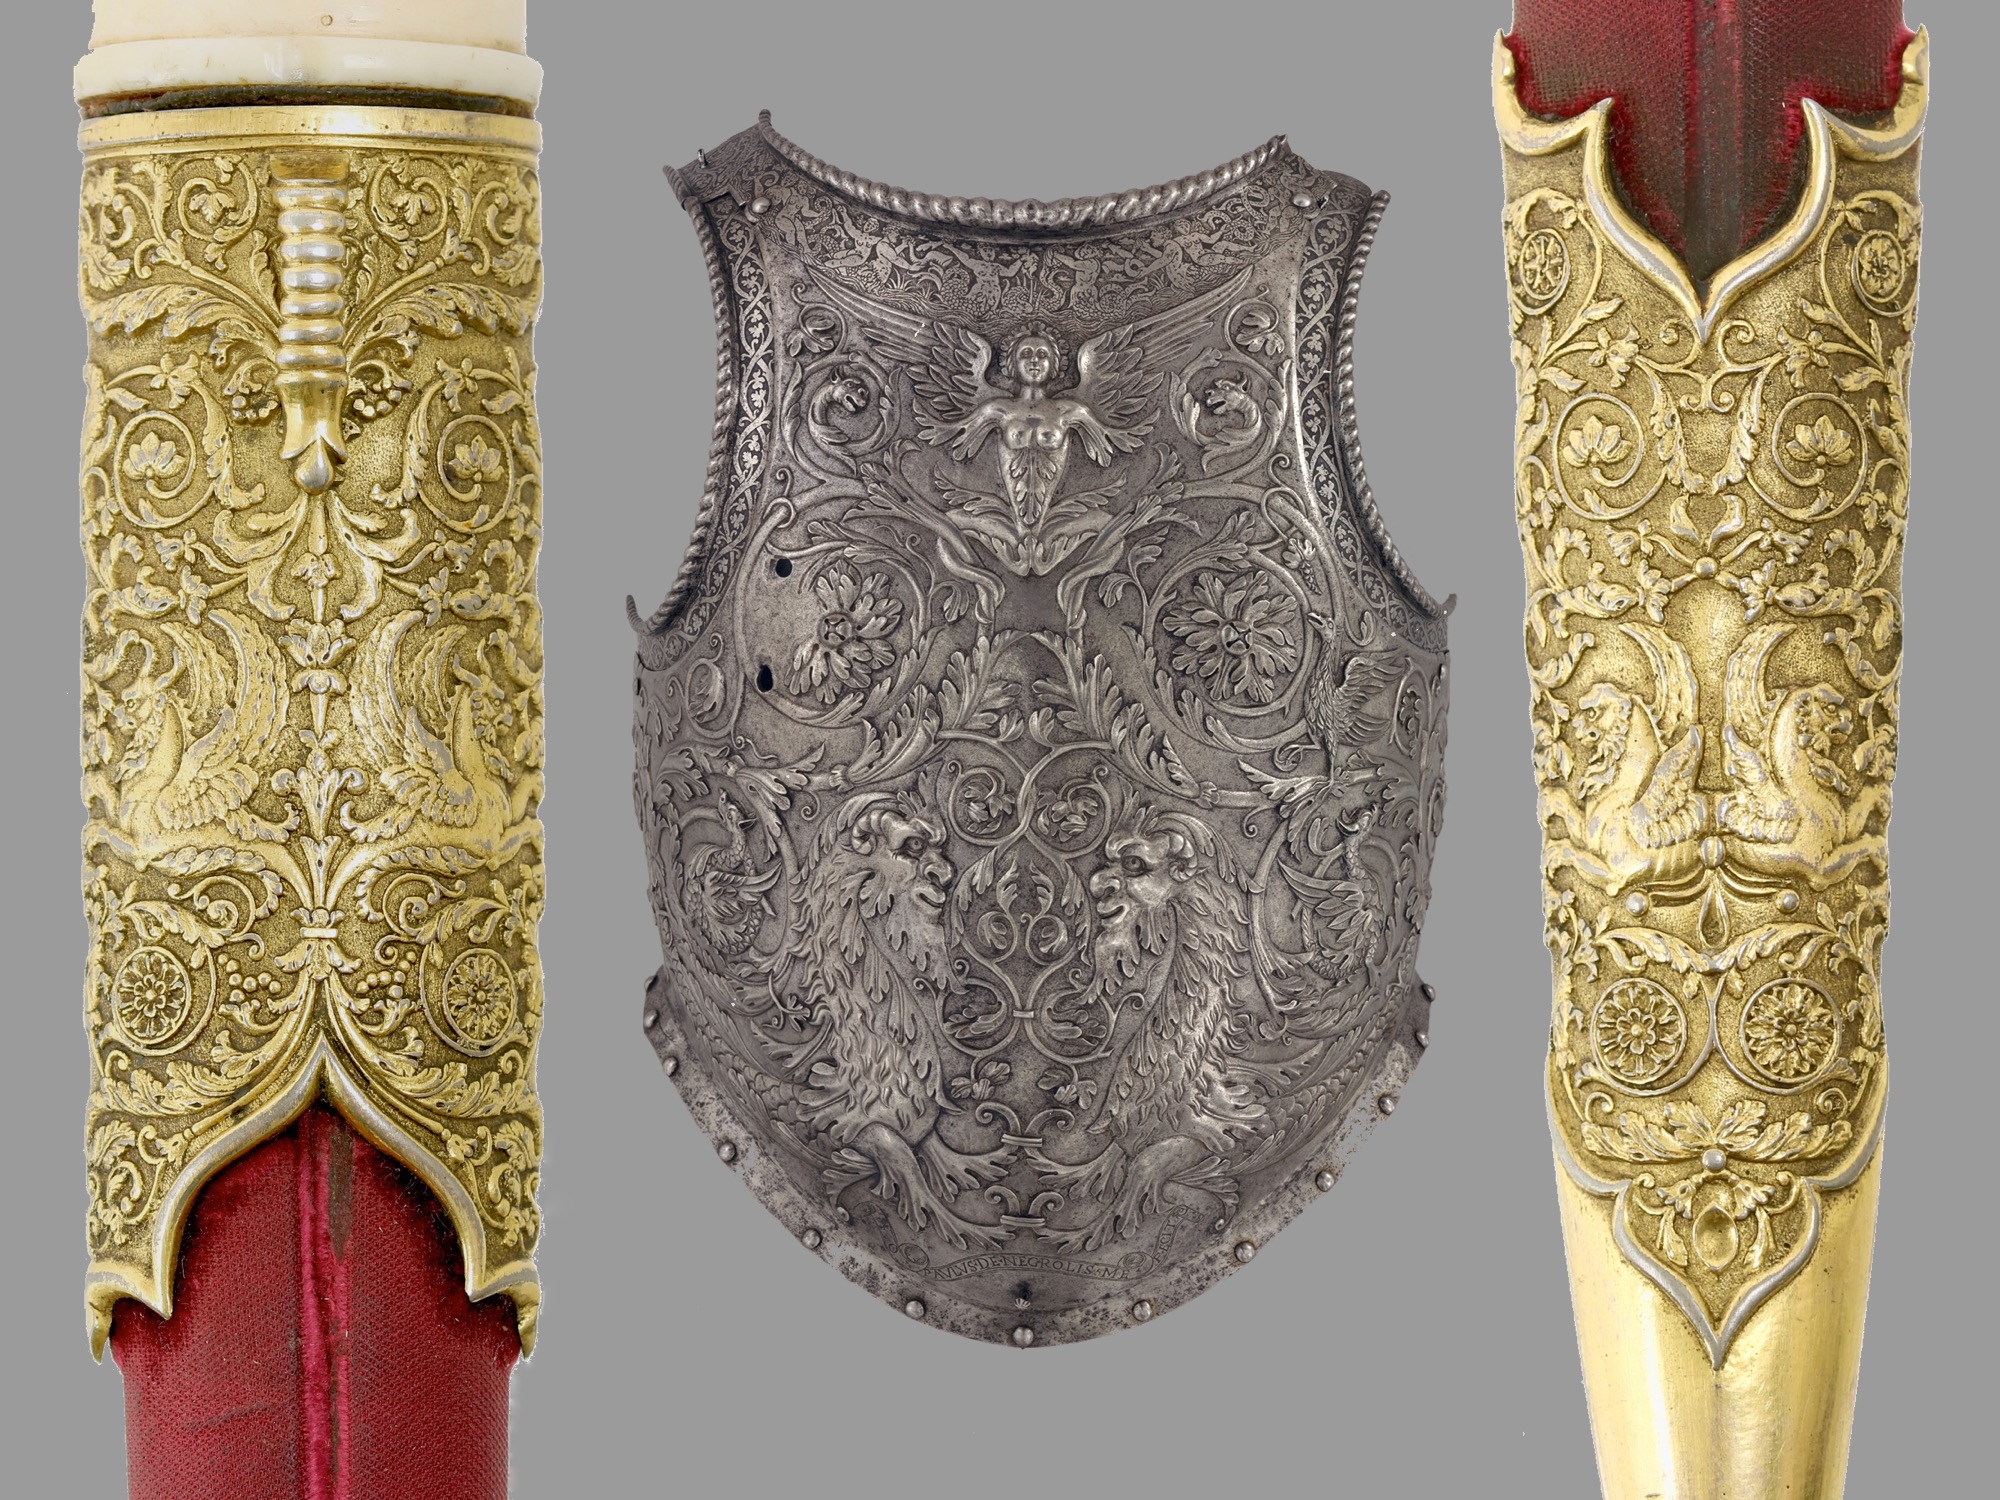 Comparison between Ottoman style dagger and Milanese renaissance breastplate